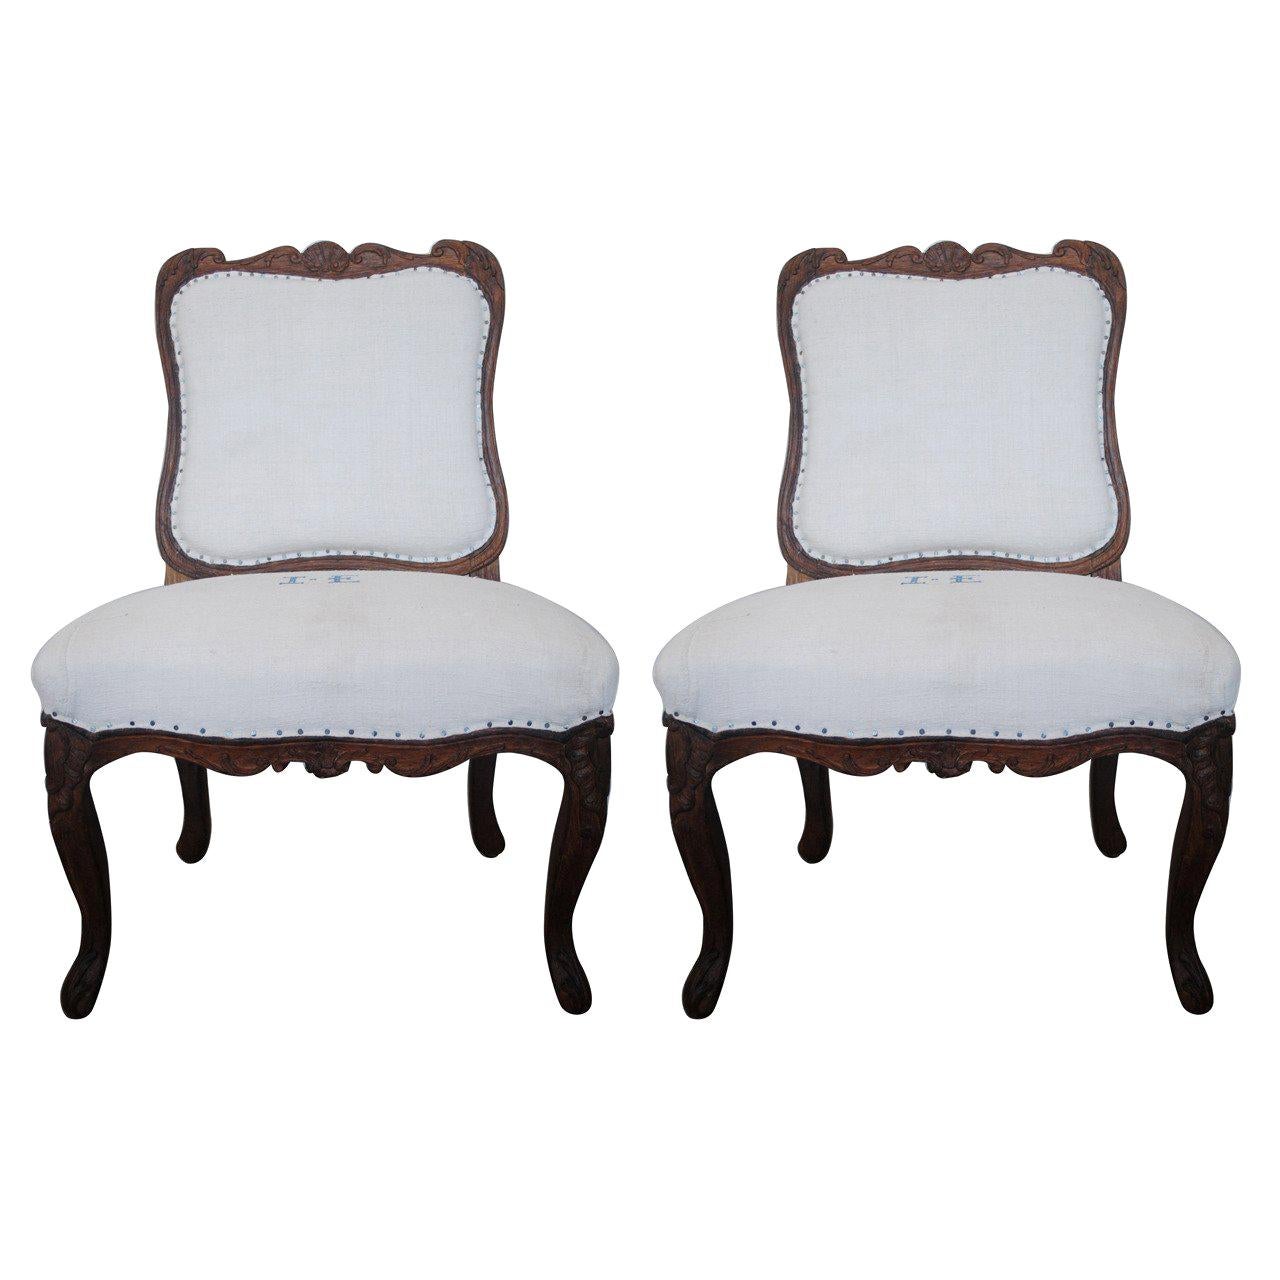 Pair of 19th Century Chestnut Slipper Chairs For Sale